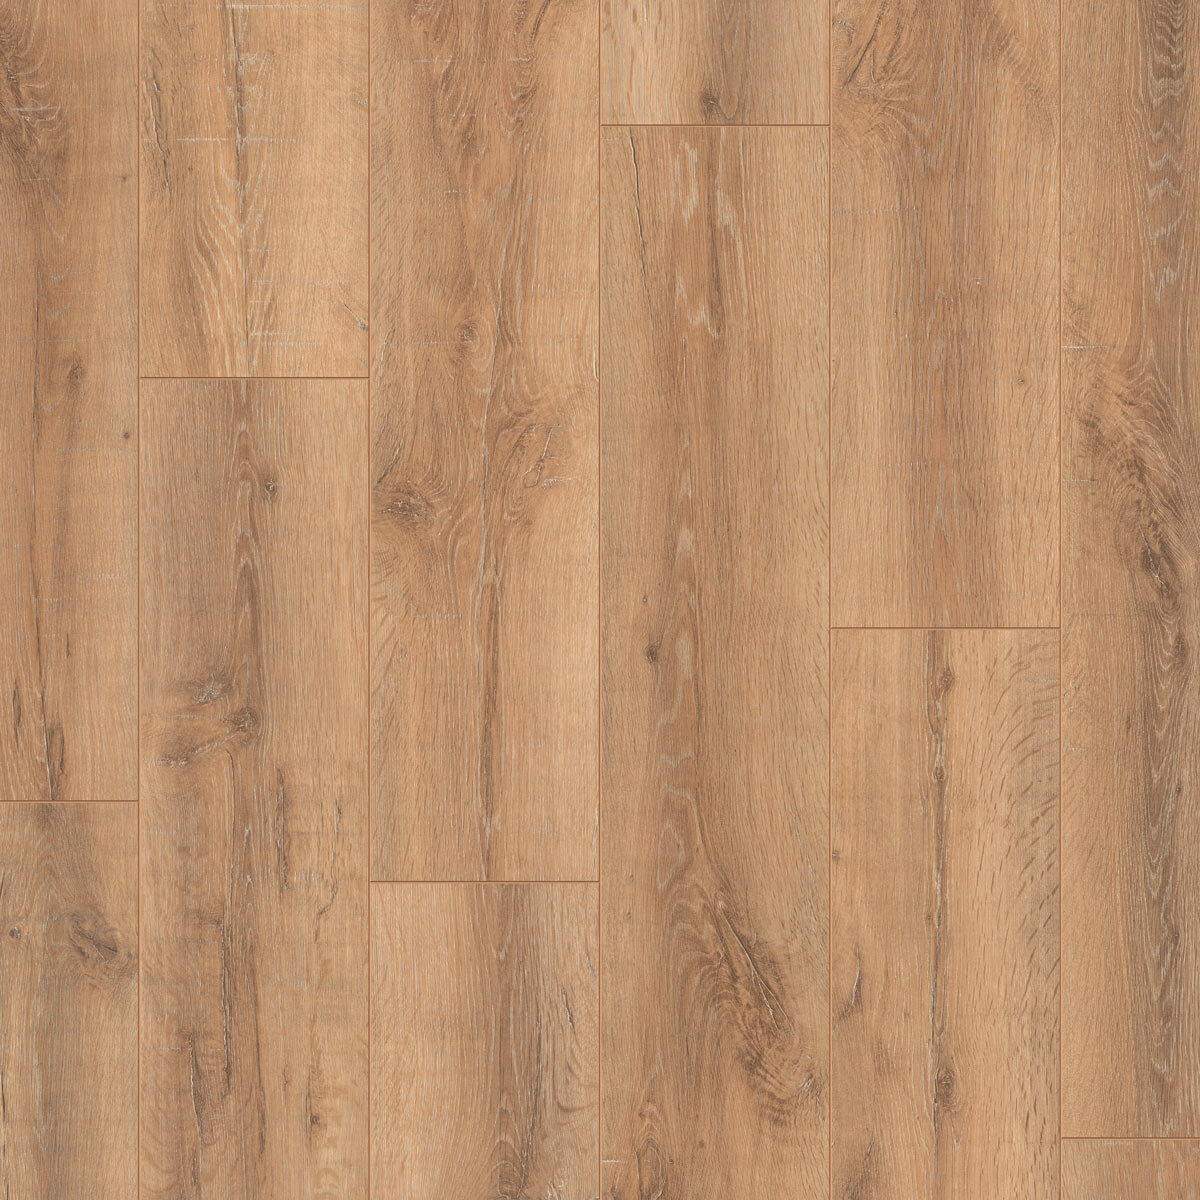 Cut out image of flooring flat